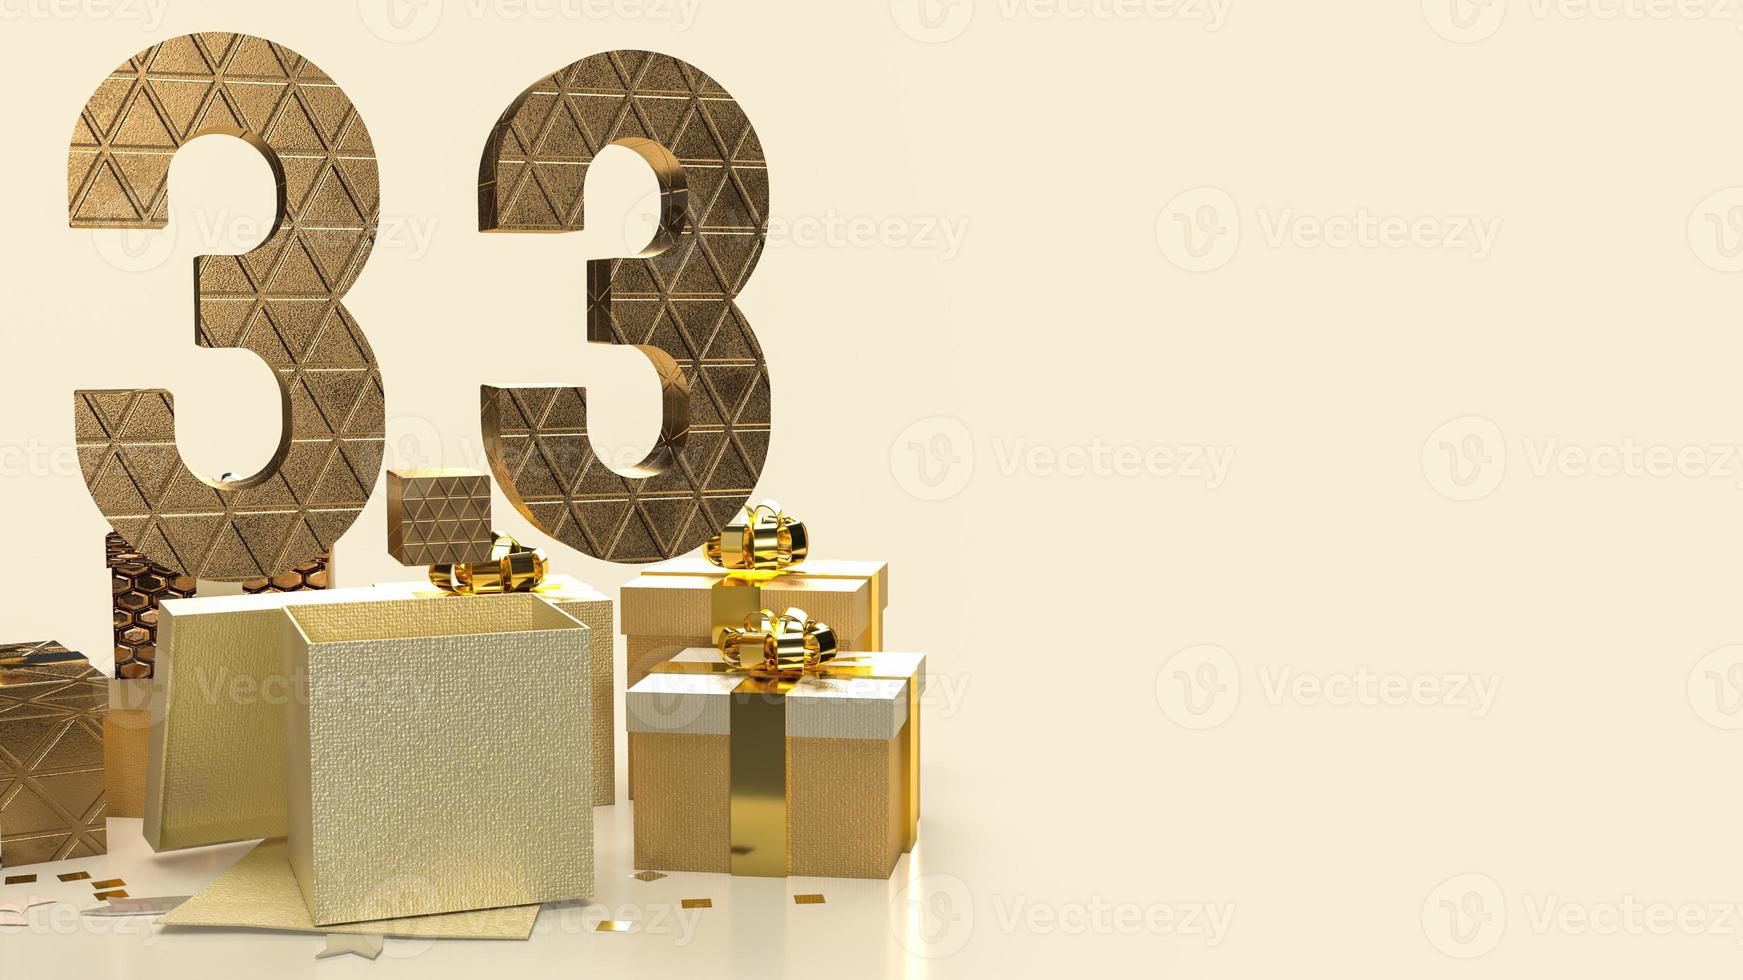 The 3.3 and gold gift box  for marketing  or sale  promotion 3d rendering photo